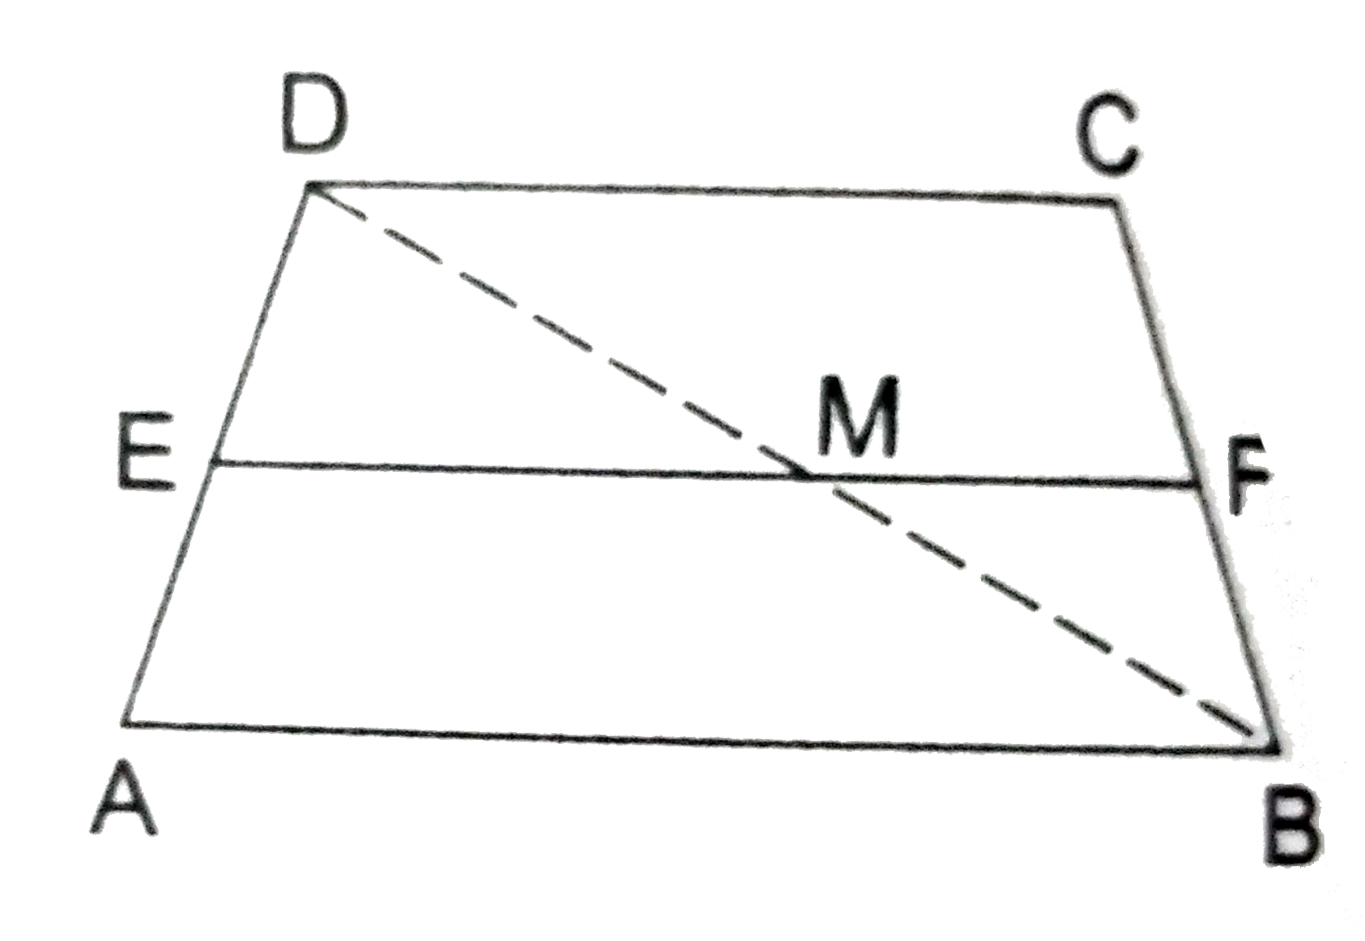 Let ABCD be a trapezium in which AB||DC and let E be the midpoint of AD. Let F be a point on BC such that EF||AB. Prove that      (i) F is the midpoint of BC, (ii)   EF =(1)/(2)(AB+DC).